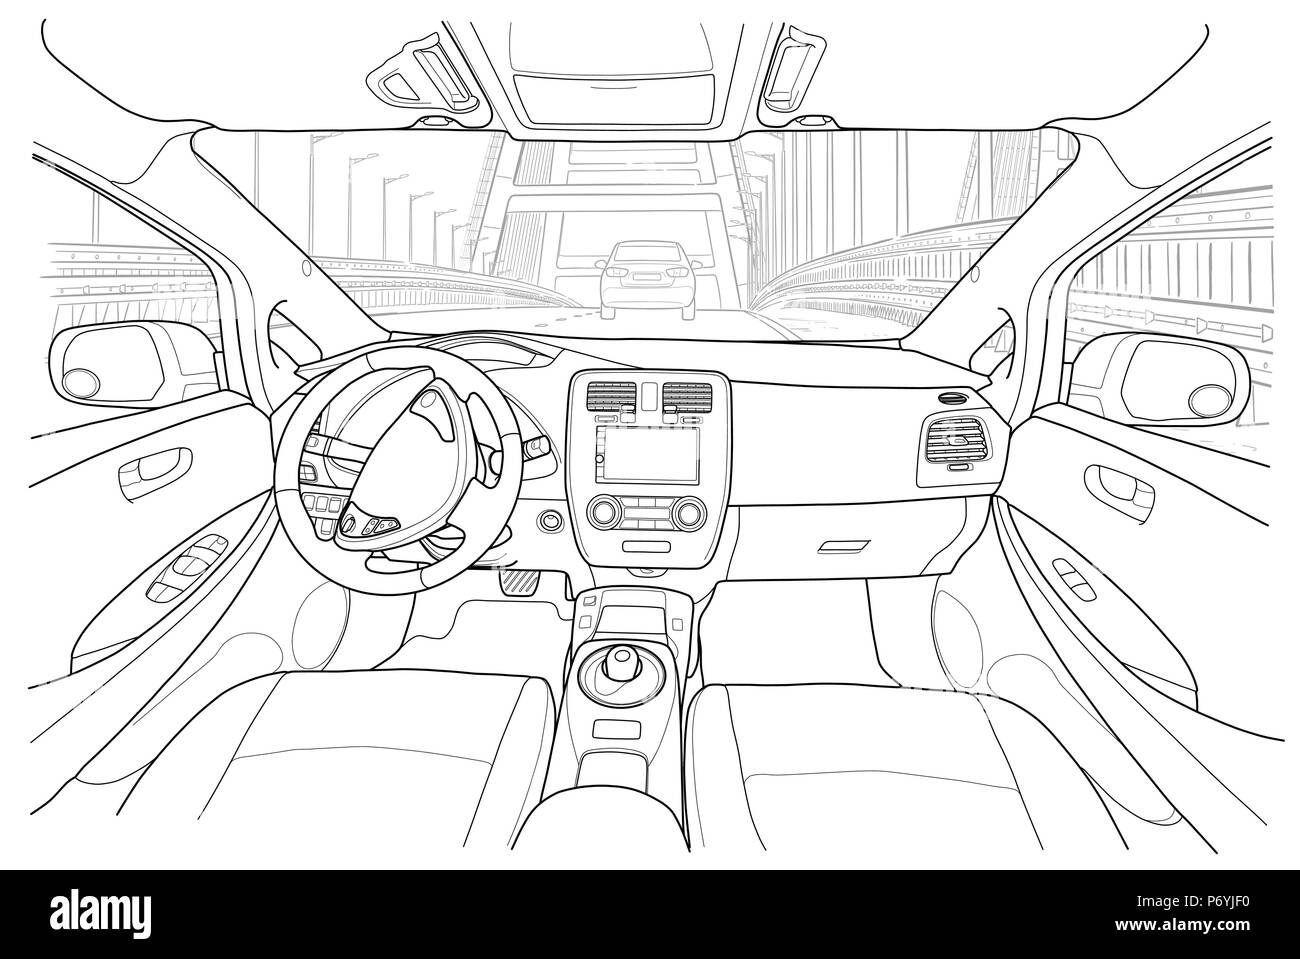 The machine inside. The interior of the electromobile vehicle with automatic transmission. Vector illustration of the lines. Stock Vector